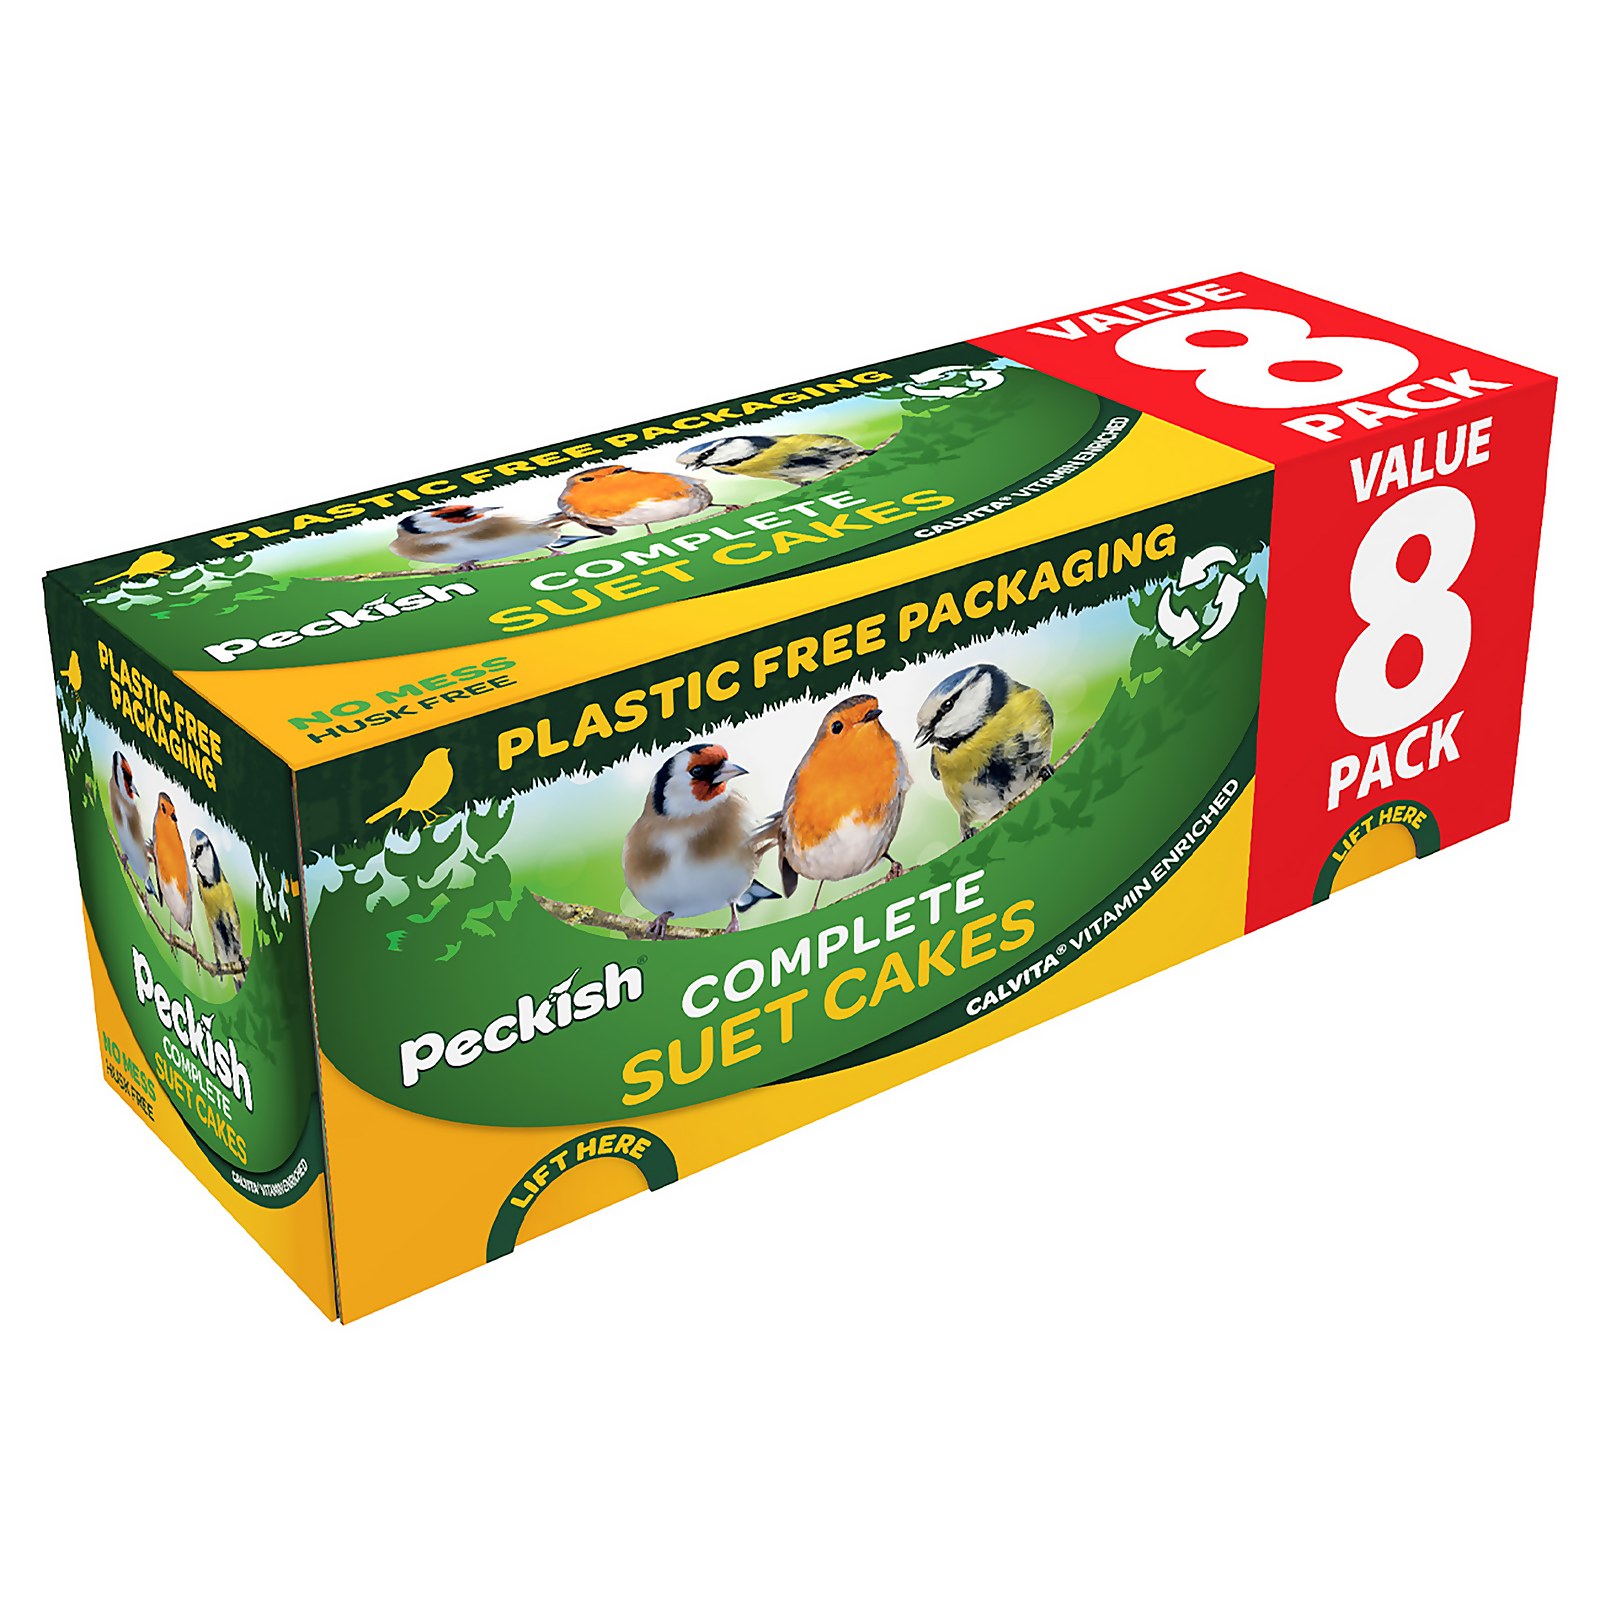 Photo of Peckish Complete Suet Cakes - 8 Pack